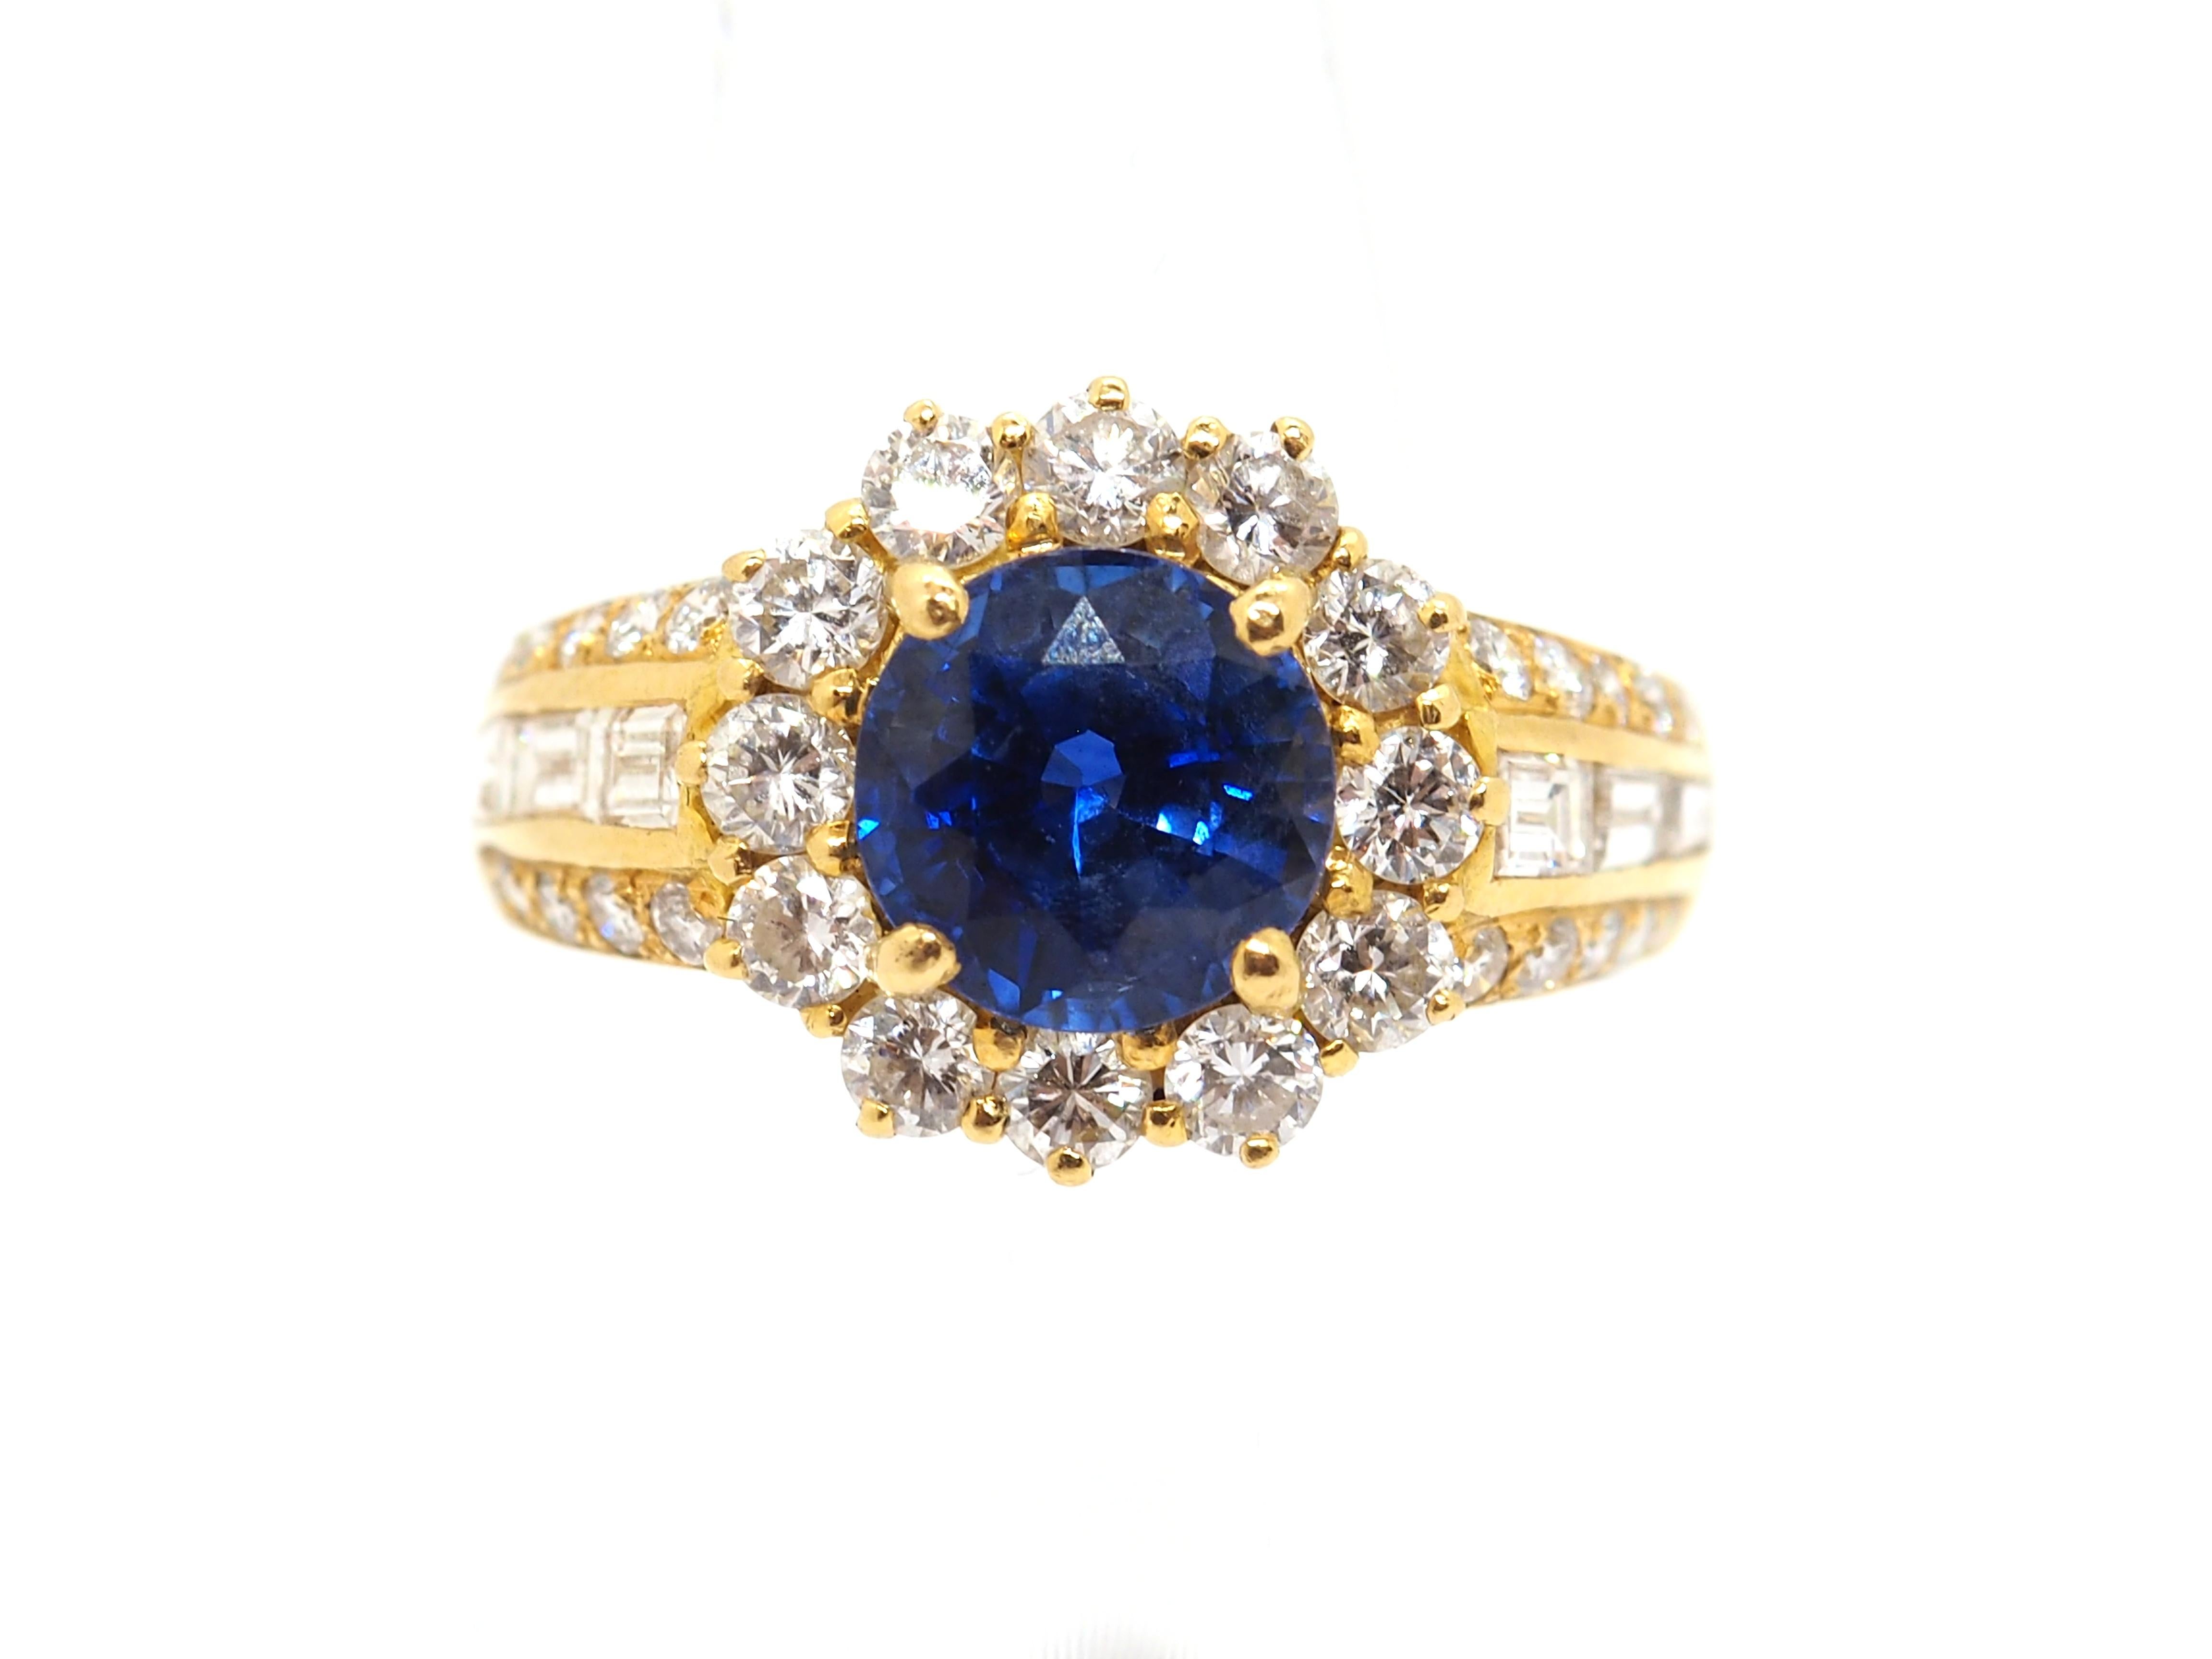 Beautiful cluster ring crafted in 18K yellow gold with a royal blue unheated and untreated round sapphire surrounded by a halo of round-cut brilliant diamonds with an approximate weight of 1 carat. Decorated also by the both sides with a round-cut